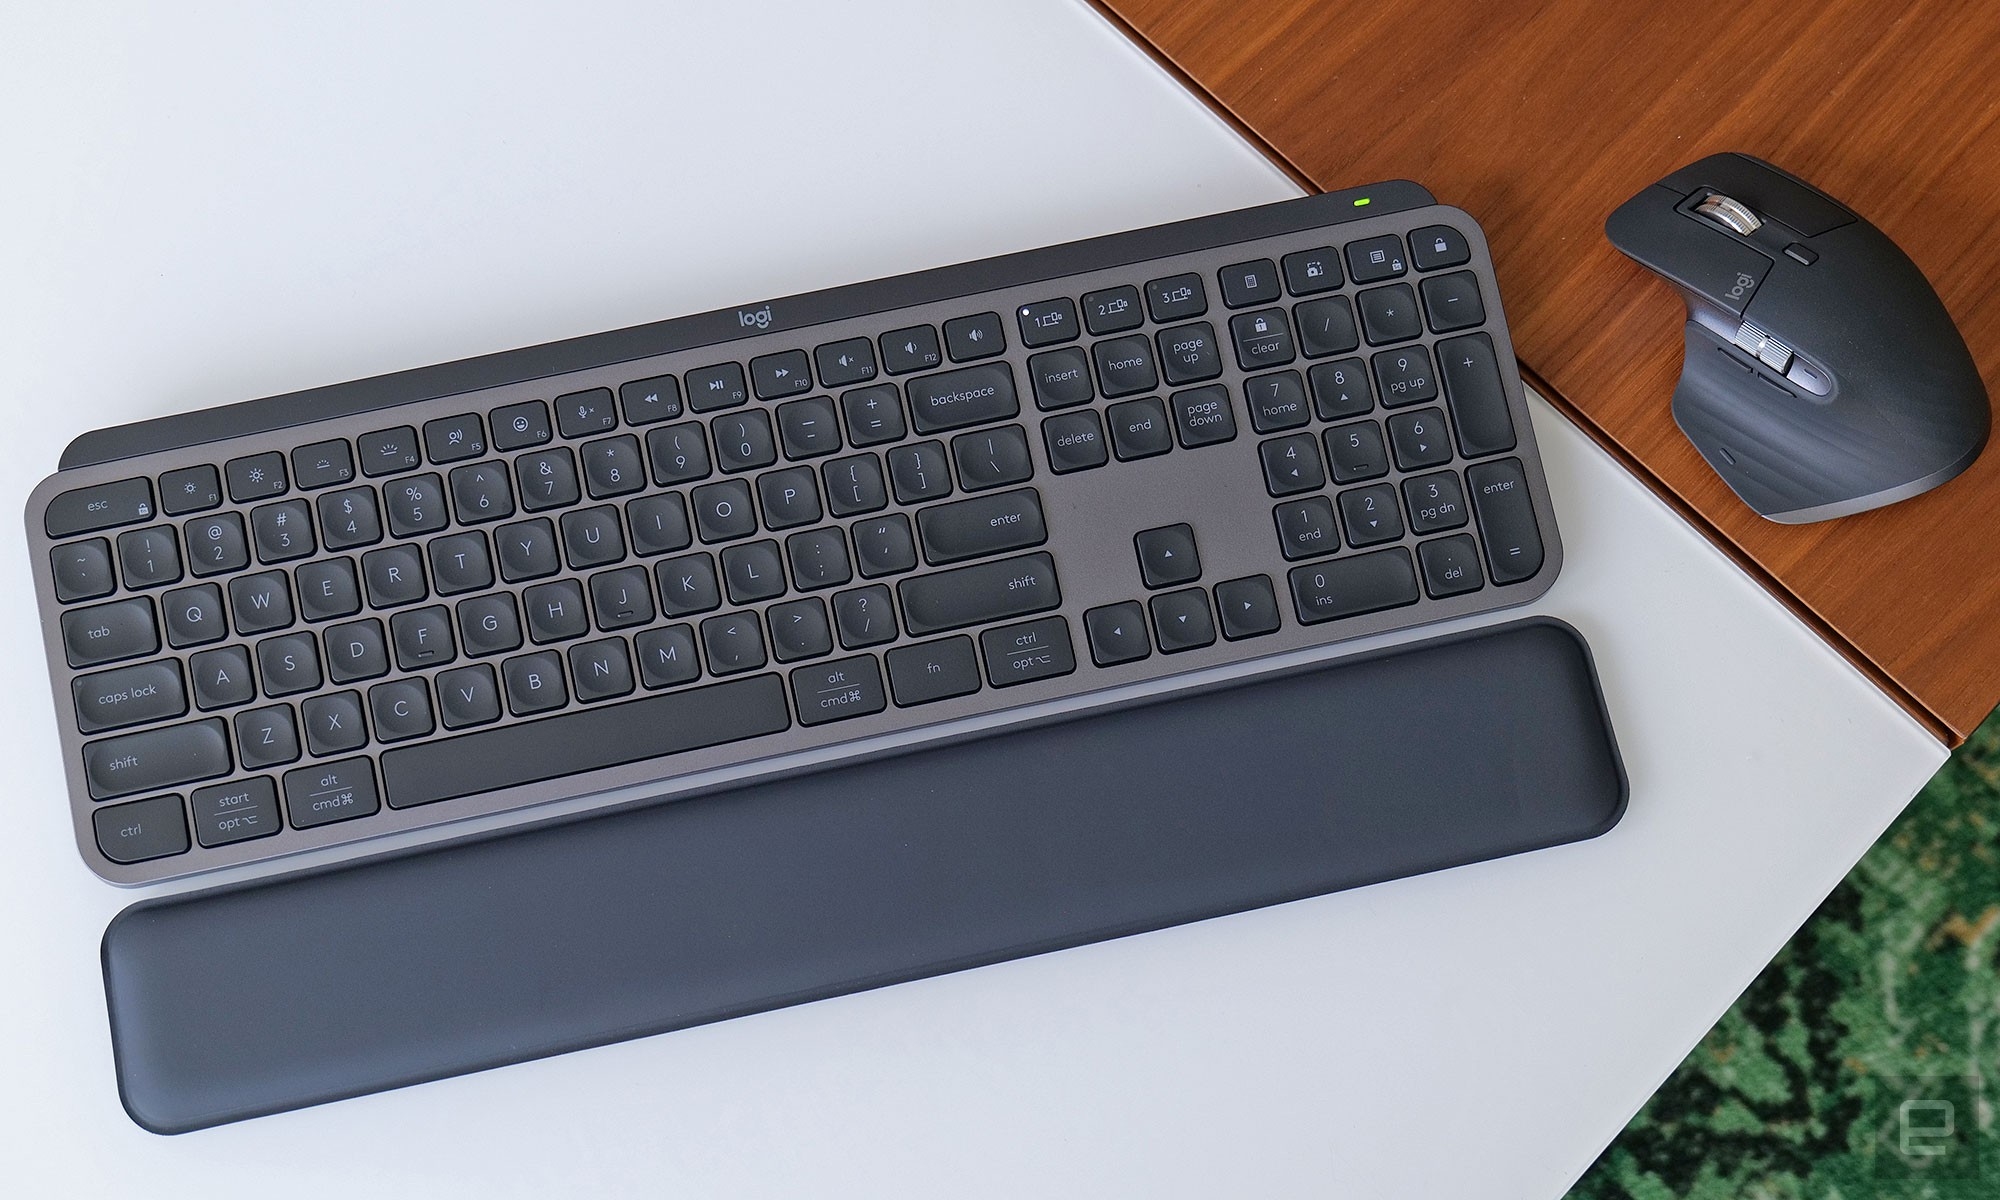 The new MX Keys S combo bundle includes the keyboard, and MX Master 3S mouse and the MX Wrist Rest for $  200 -- $  30 less than what everything would cost if purchased separately. | DeviceDaily.com